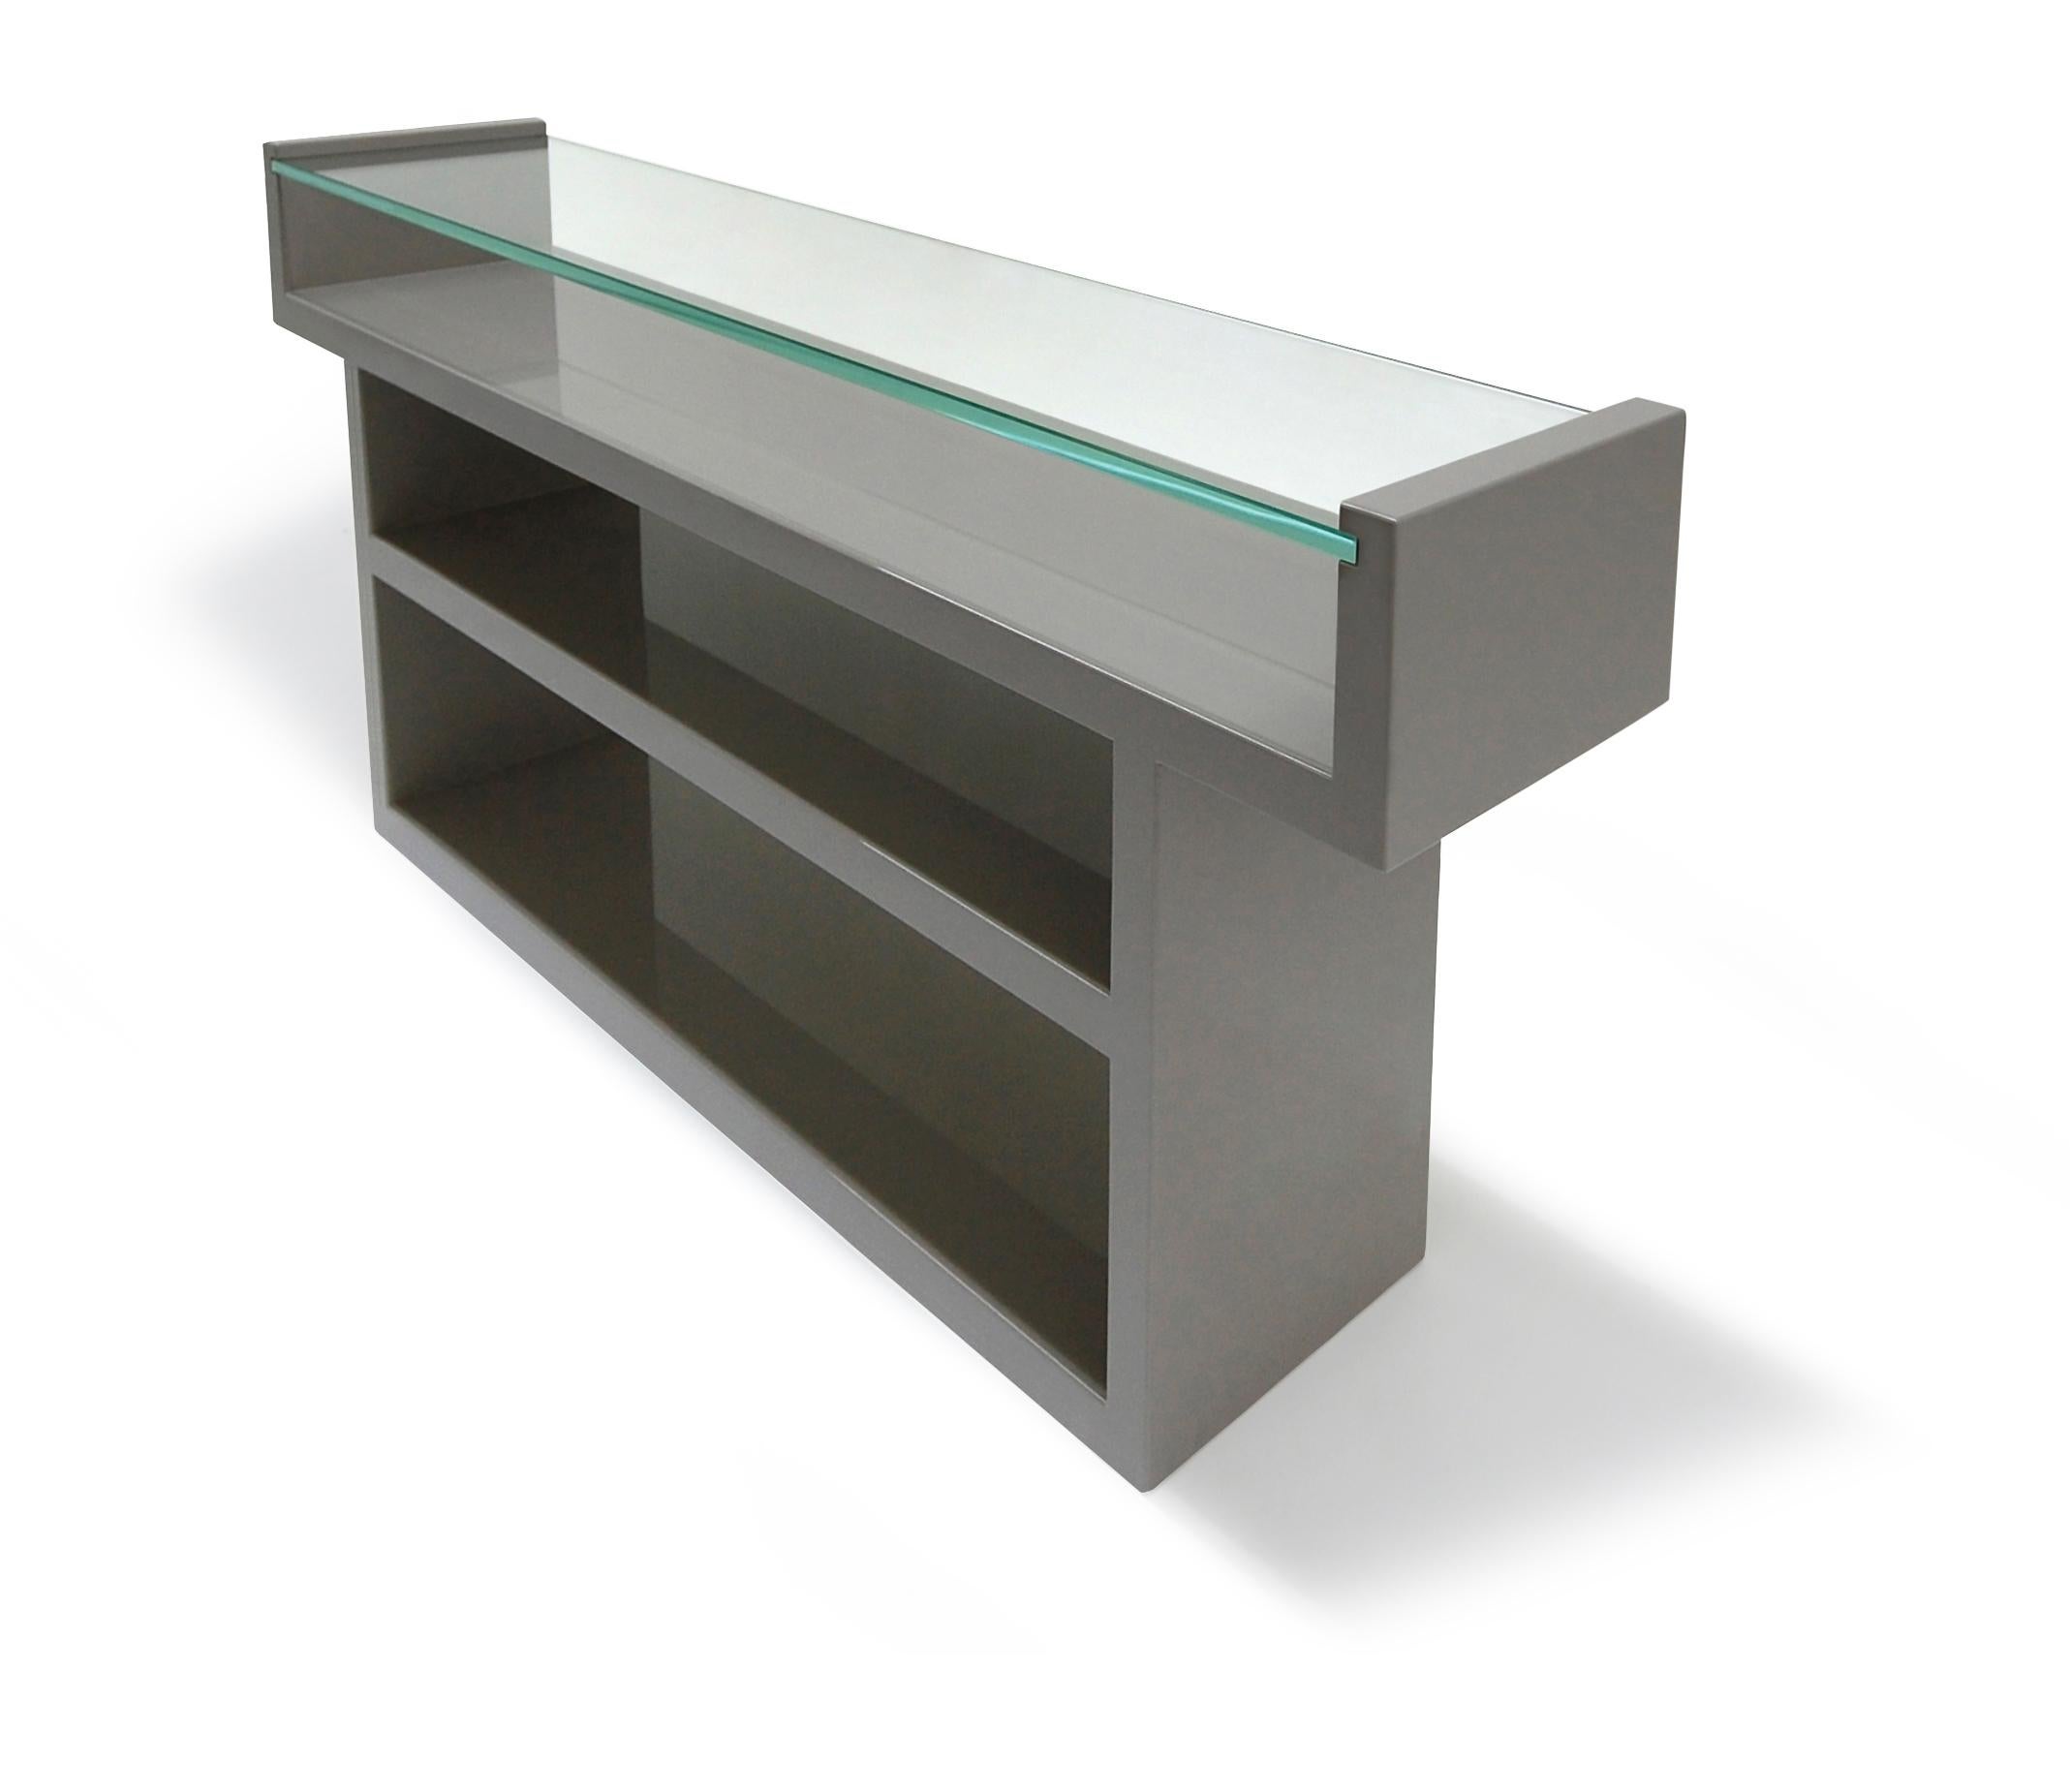 The stunning Hinge Console is a harmonious balance between its sleek sophisticated glass top and the strong lacquer frame into which it is set. Clean lines and strong angles of this Hinge Console make this a bold choice for any space.

Glass: